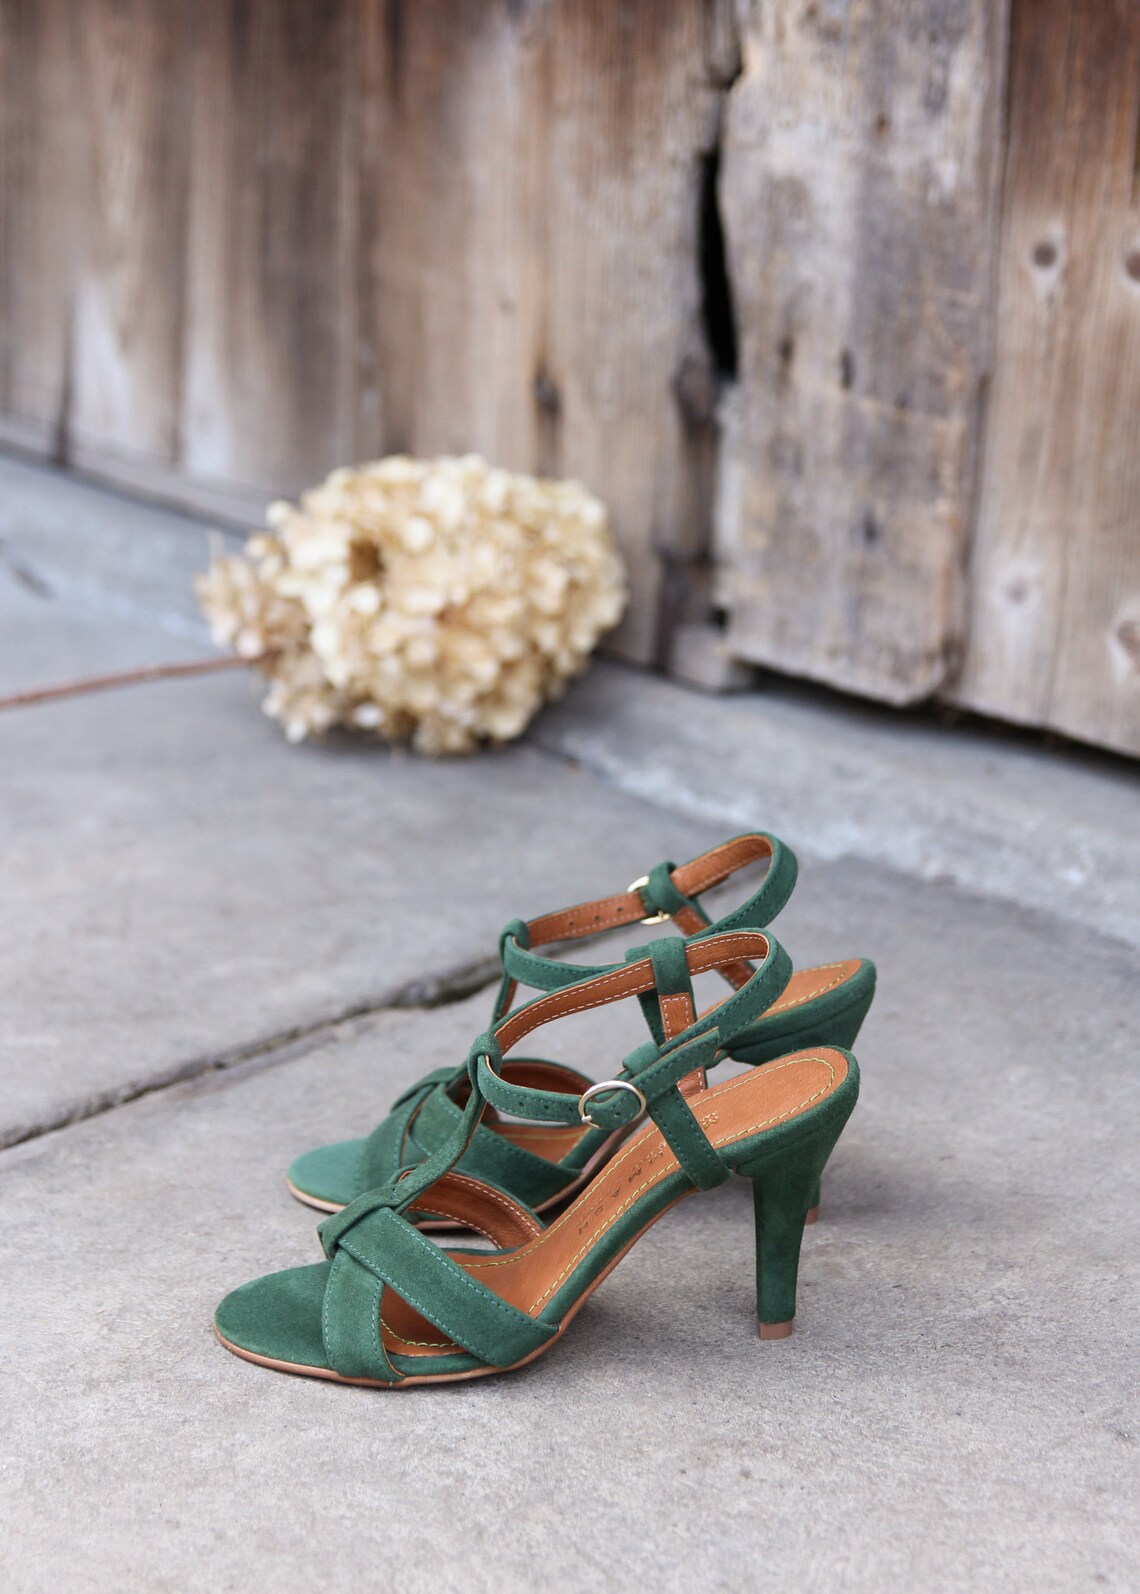 Natural Bottle Green Suede Leather High Heels Sandals Gift - Etsy